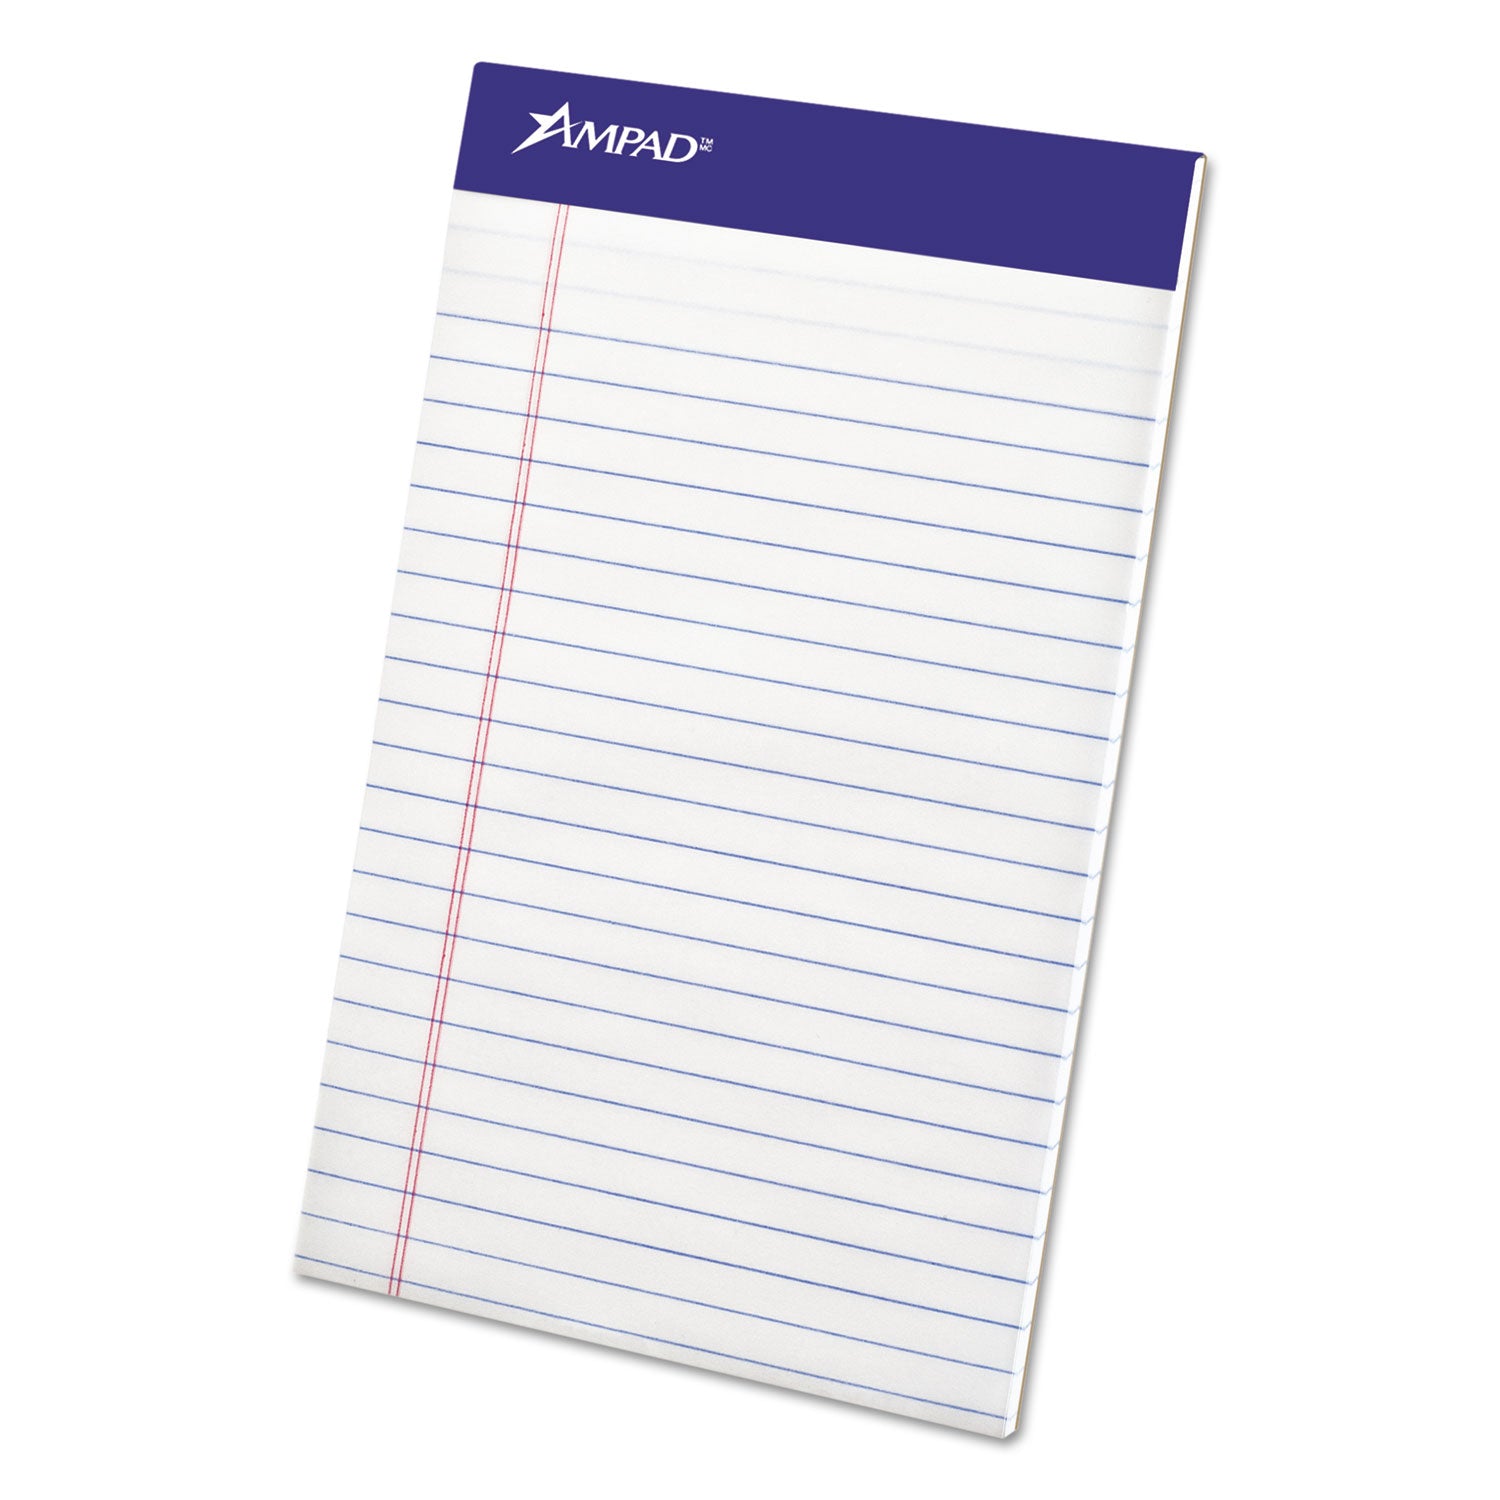 Perforated Writing Pads, Narrow Rule, 50 White 5 x 8 Sheets, Dozen - 